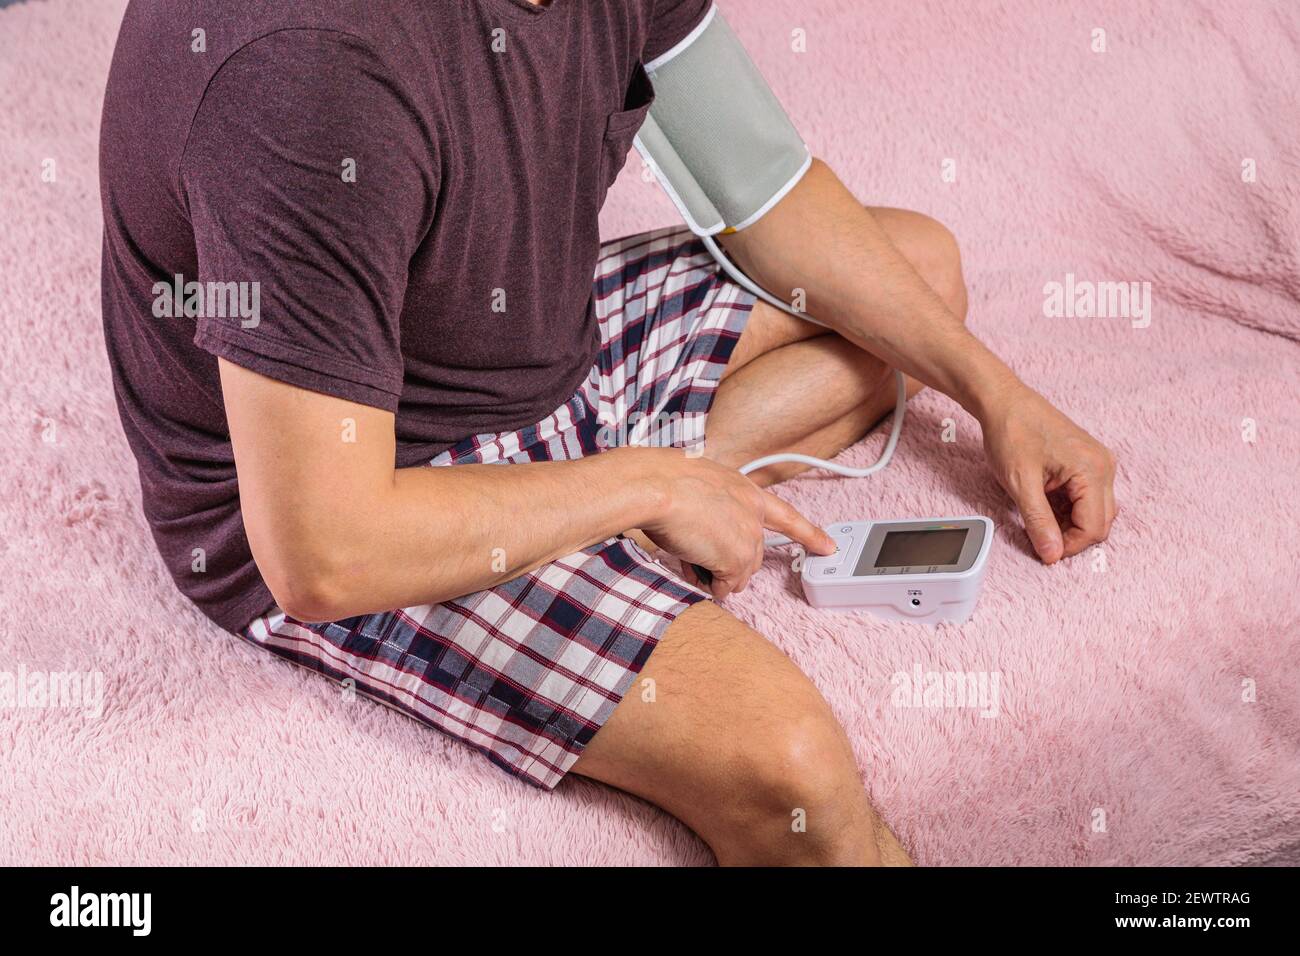 A 50-year-old man measures his blood pressure with a blood pressure monitor at home, sitting on his bed in his home clothes. Surprised by the instrume Stock Photo